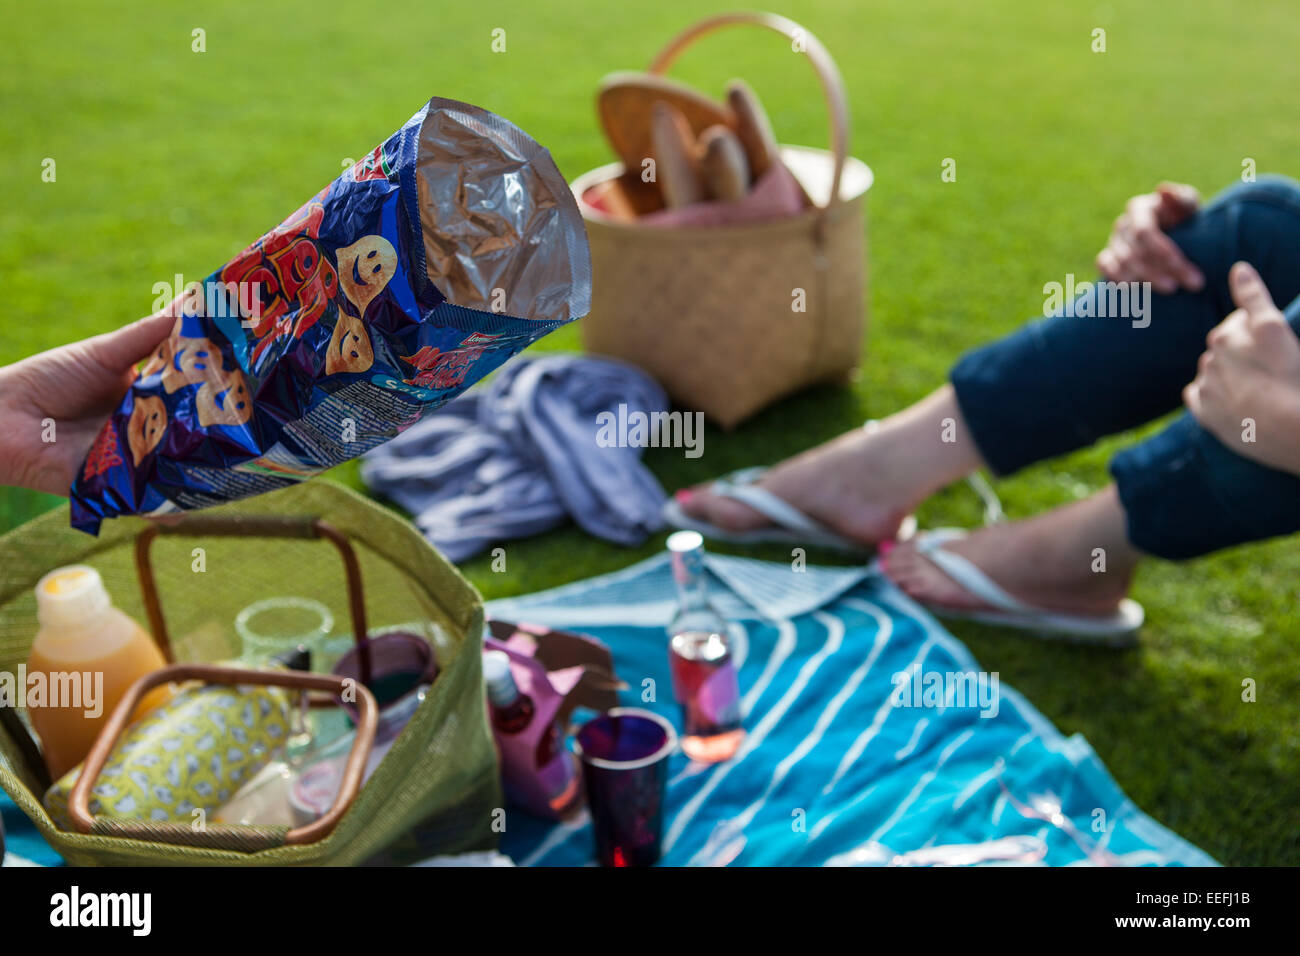 Picnic, lunch 'al fresco' with colourful rug Stock Photo